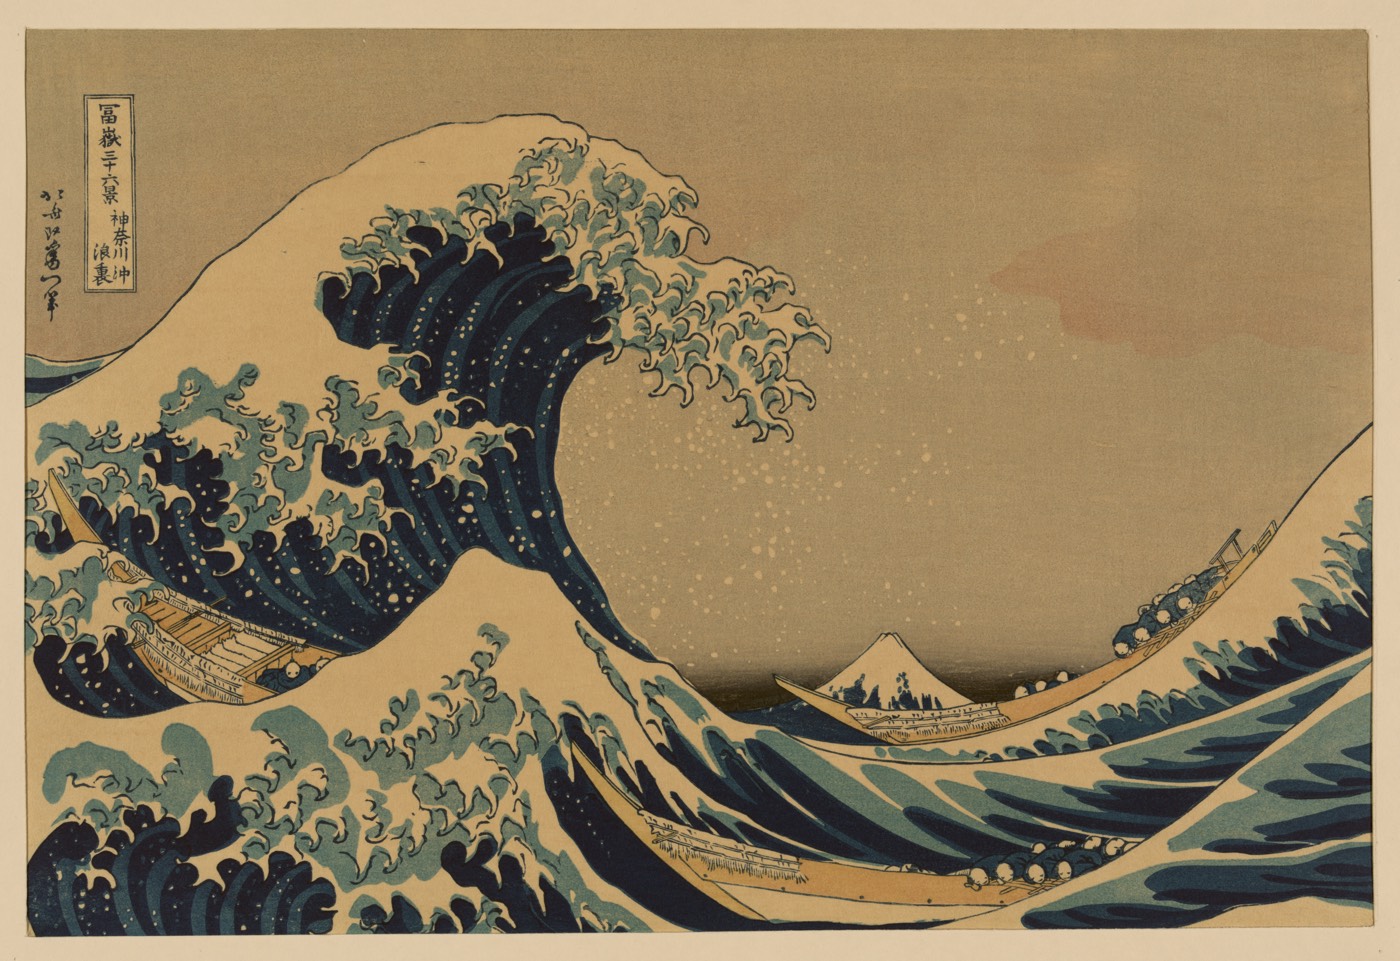 Great Wave